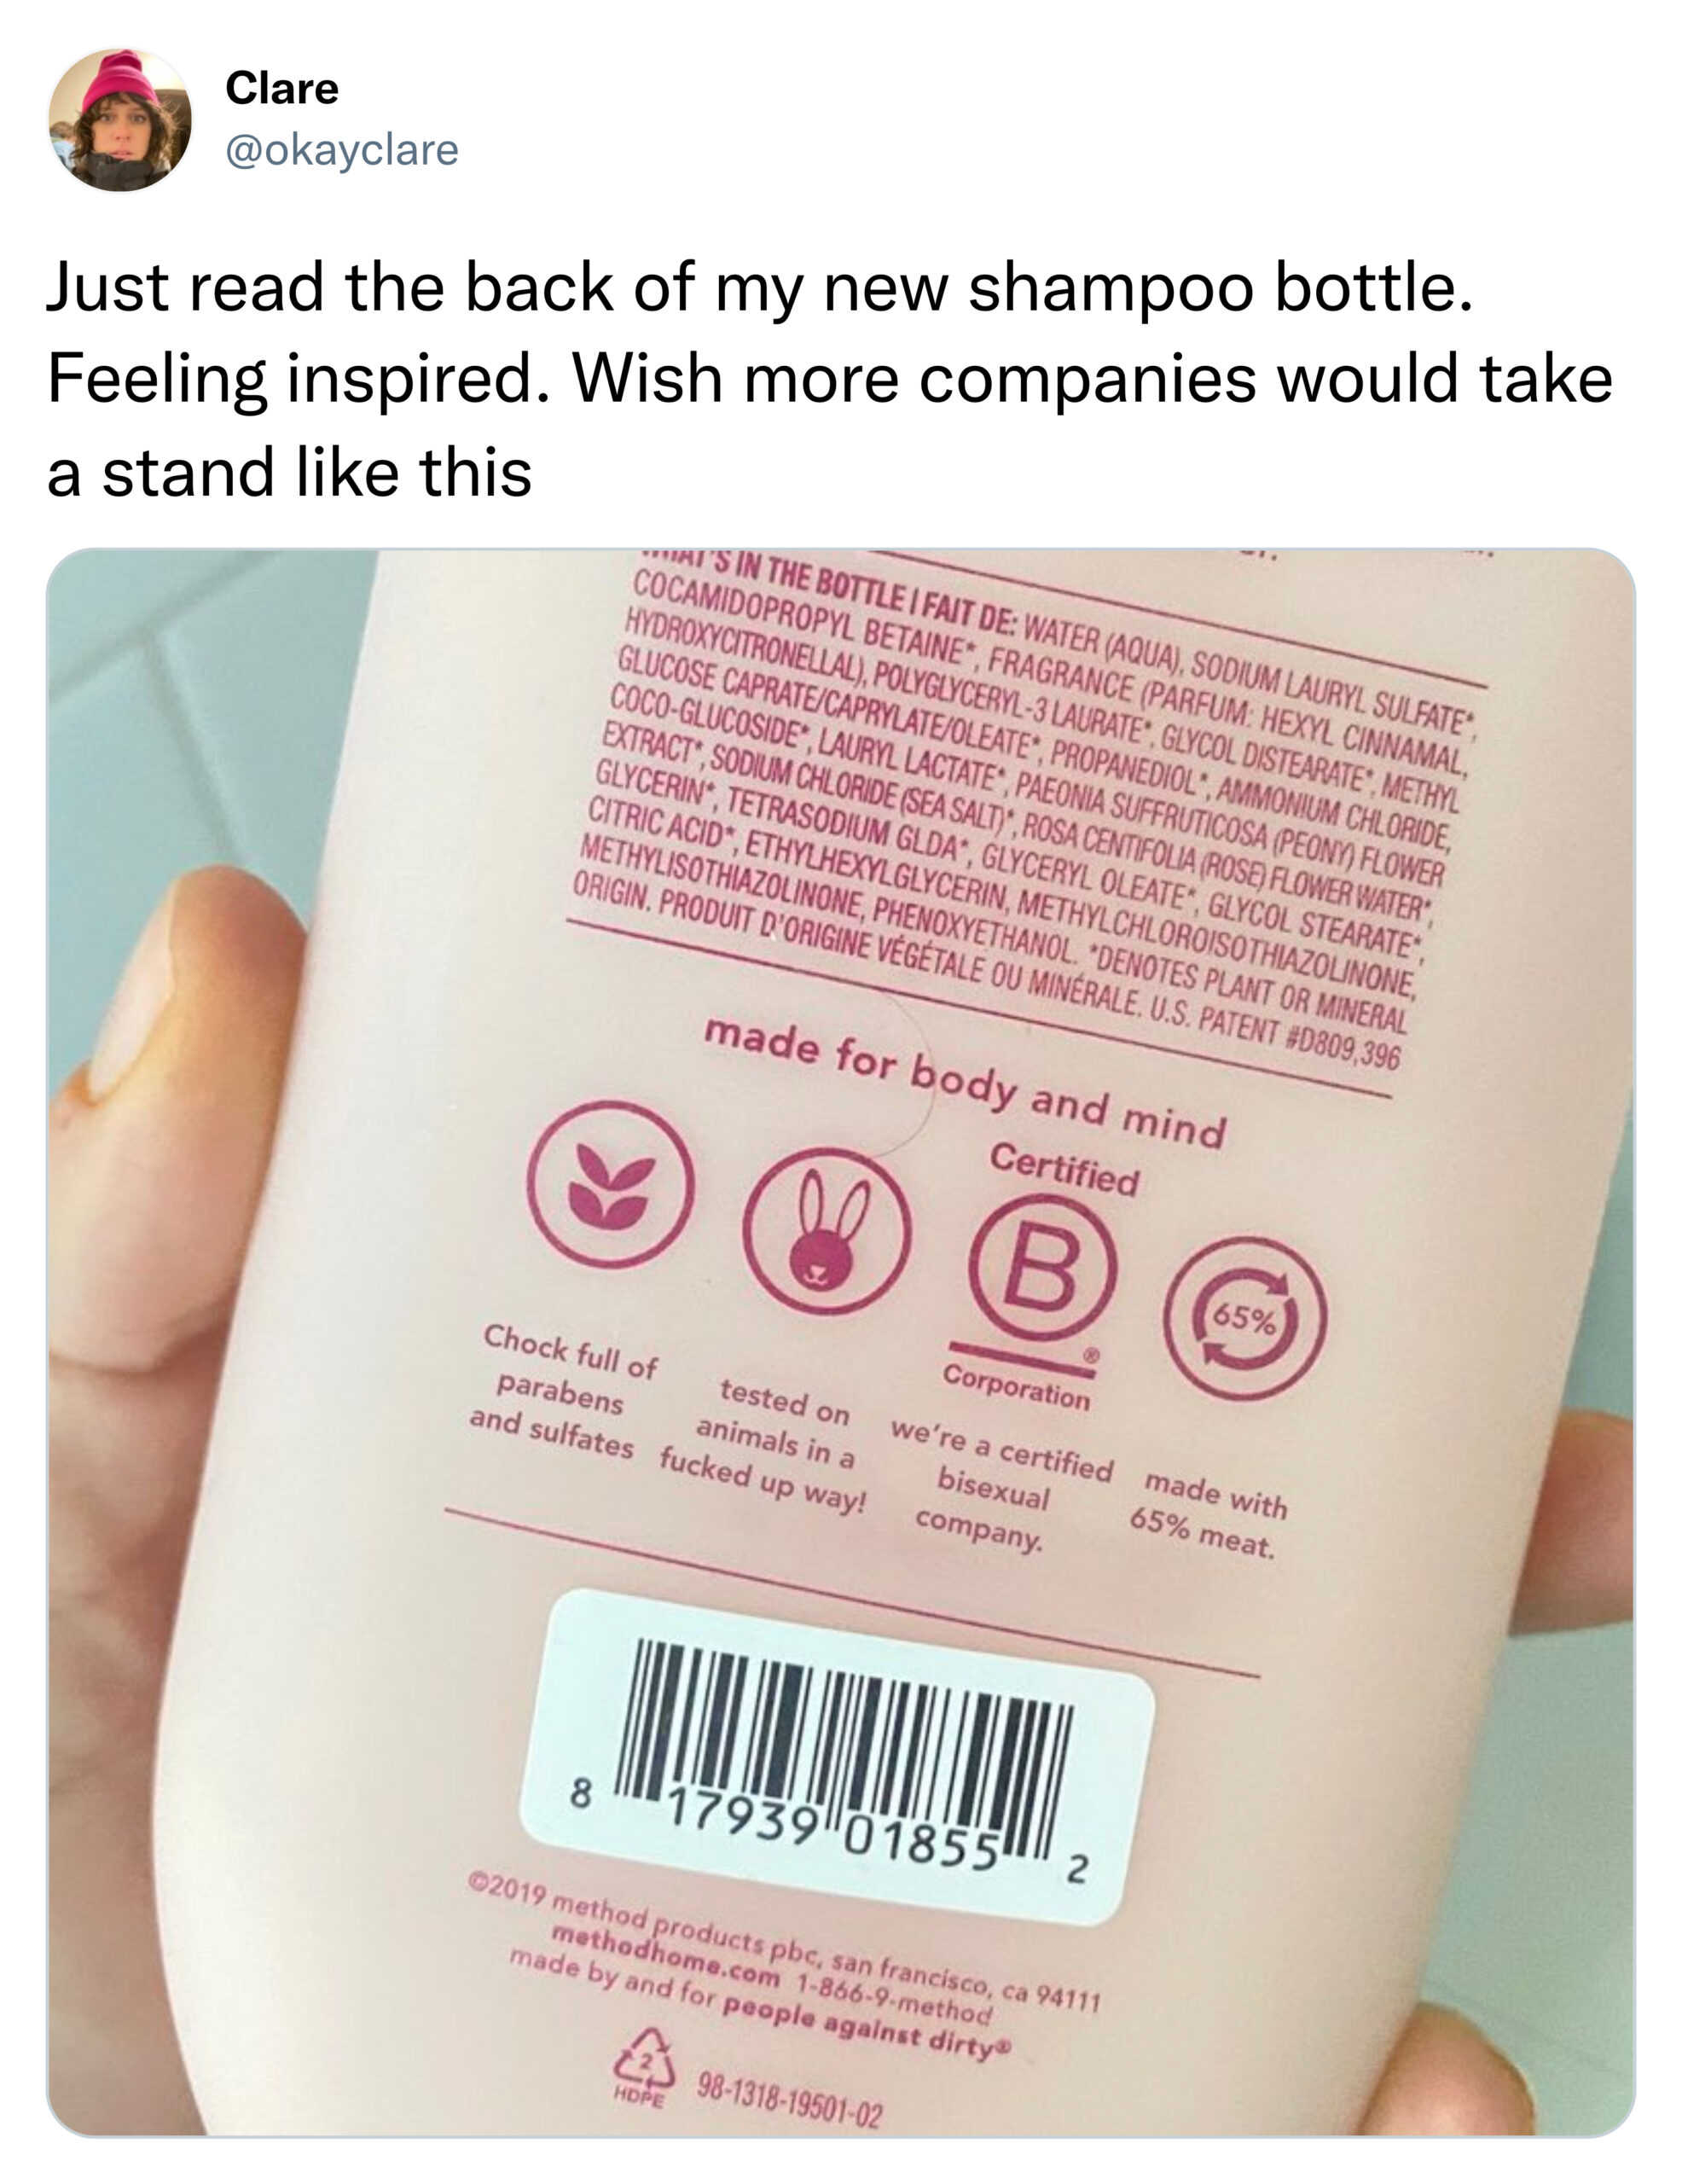 funny tweets - nail - Clare Just read the back of my new shampoo bottle. Feeling inspired. Wish more companies would take a stand this In The Bottle Fait De Er Du Solar Serp Cocandoropyl Bene Fragrance Prema Mosvodonell Powereldsteme Slicise Oporte Capreo